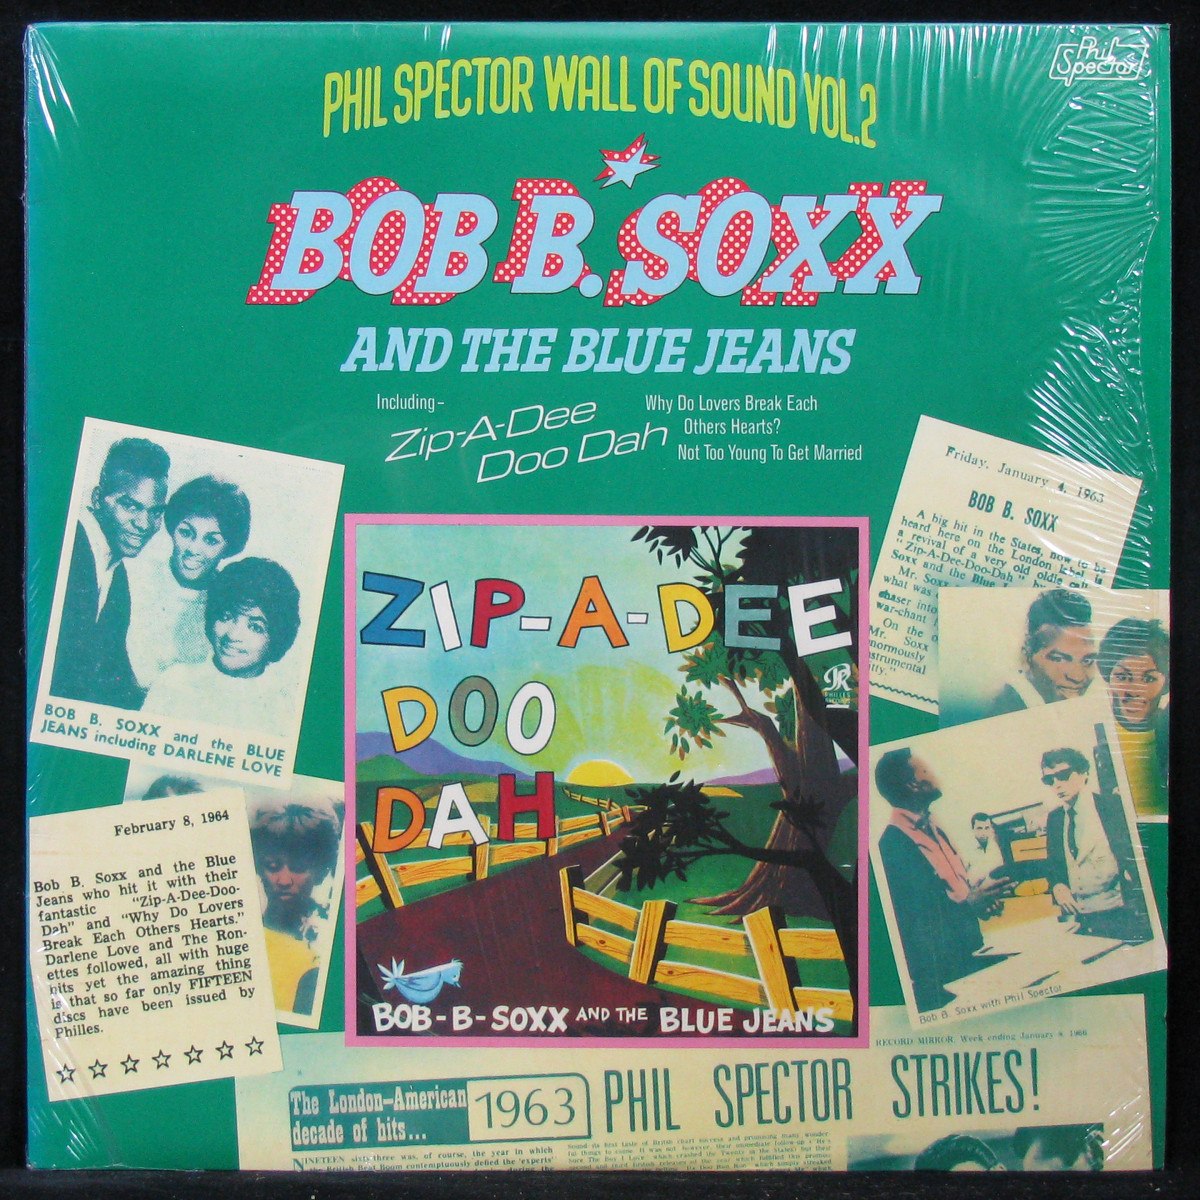 LP Bob B. Soxx And The Blue Jeans — Bob B. Soxx And The Blue Jeans (mono) фото